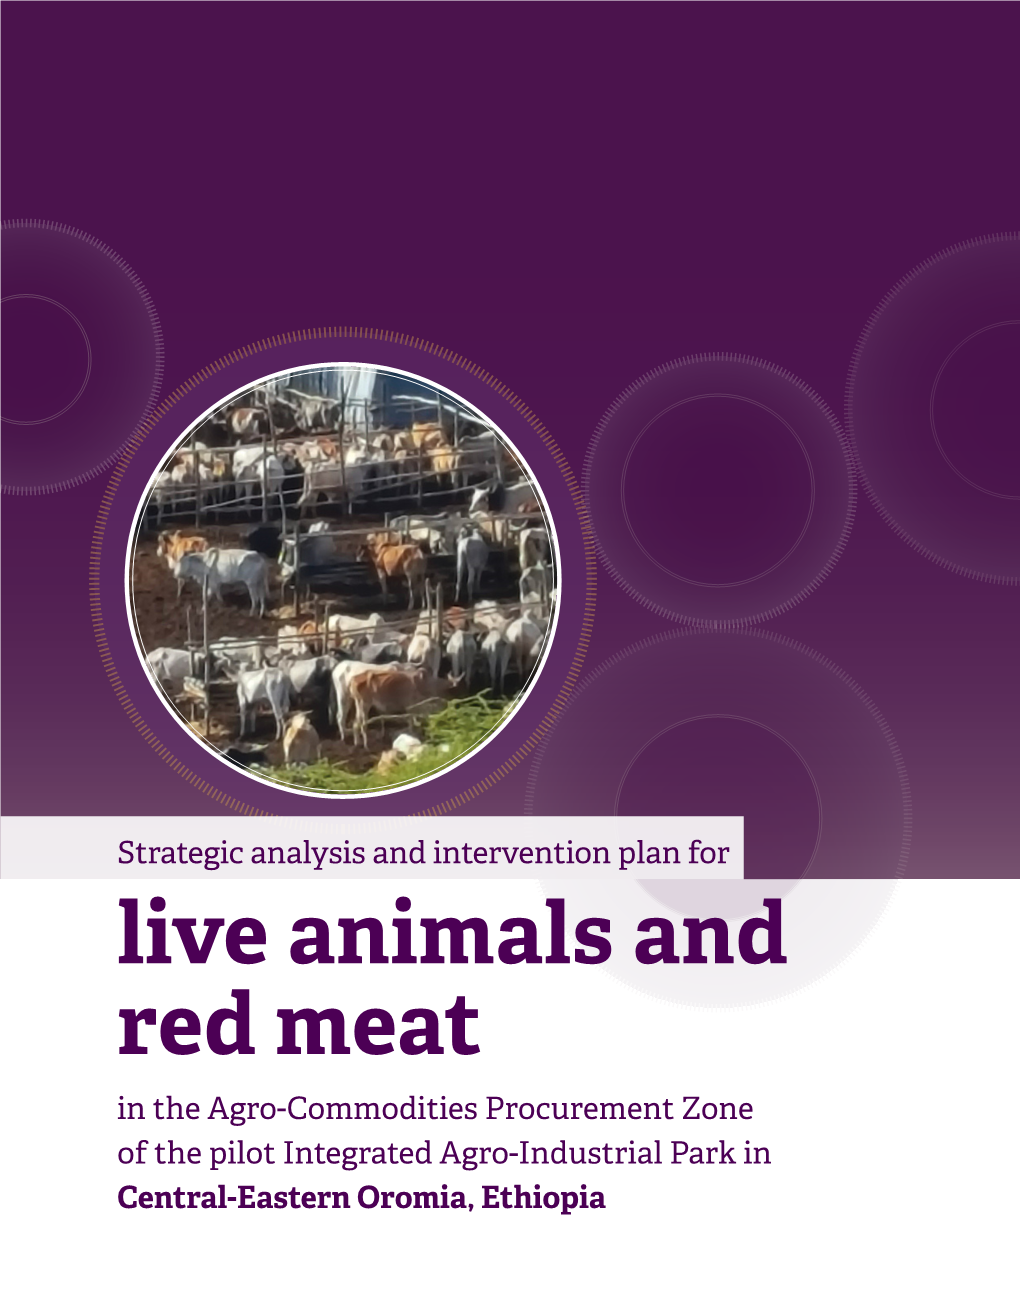 Live Animals and Red Meat in the Agro-Commodities Procurement Zone of the Pilot Integrated Agro-Industrial Park in Central-Eastern Oromia, Ethiopia